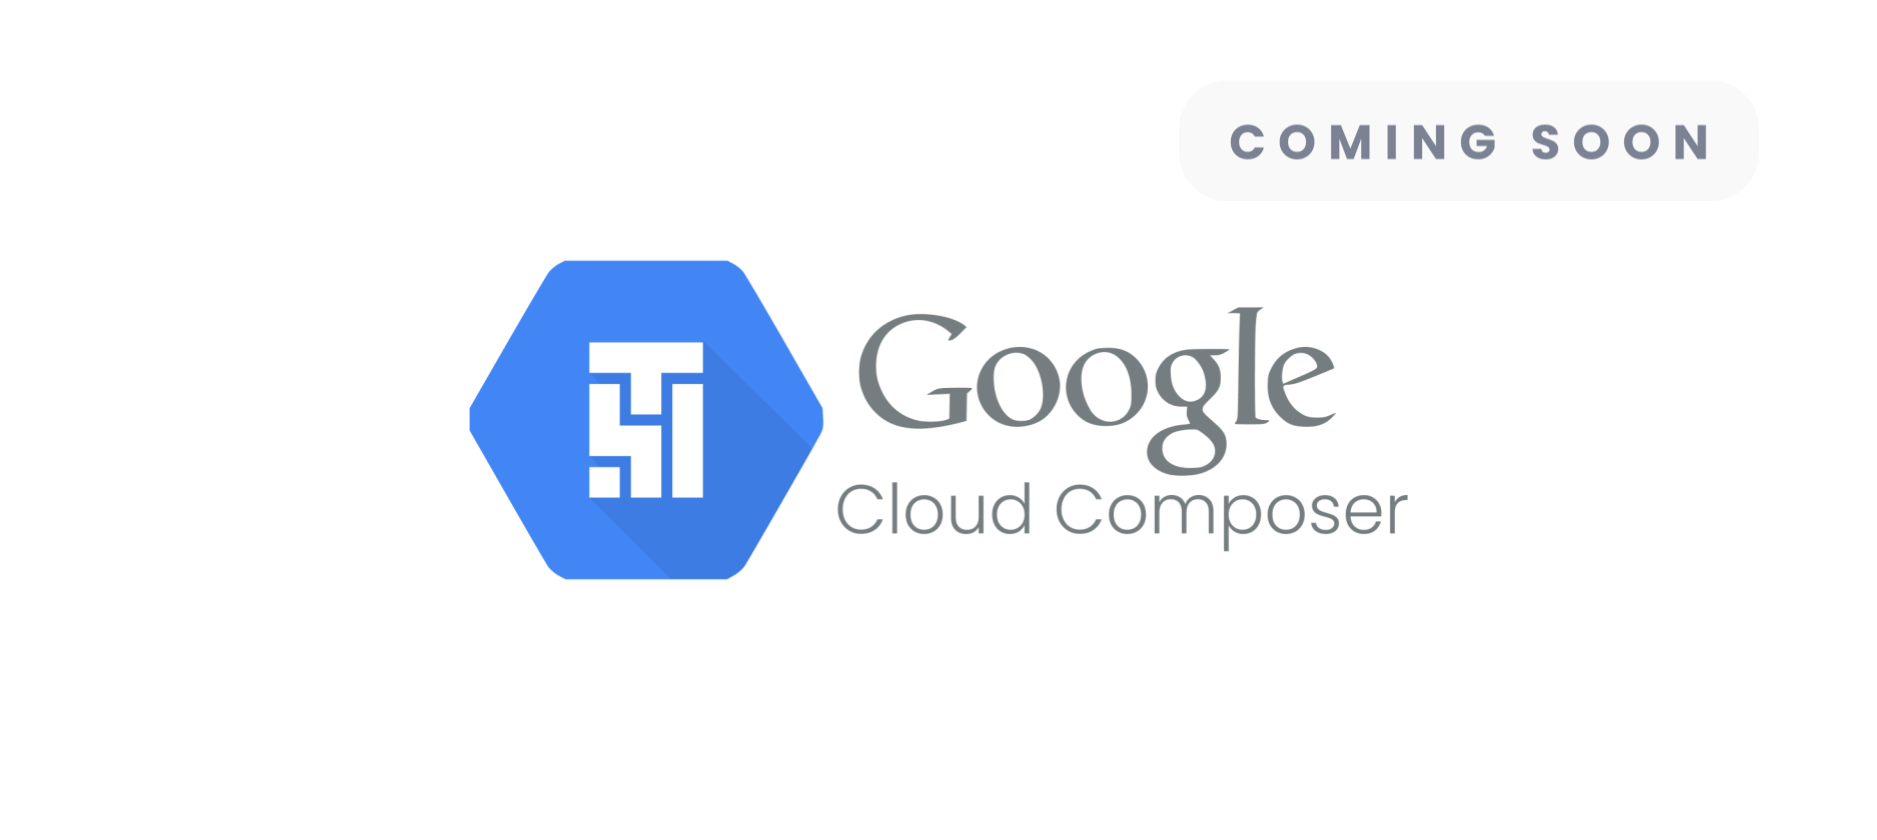 Orchestration - Google Cloud Composer - Coming soon